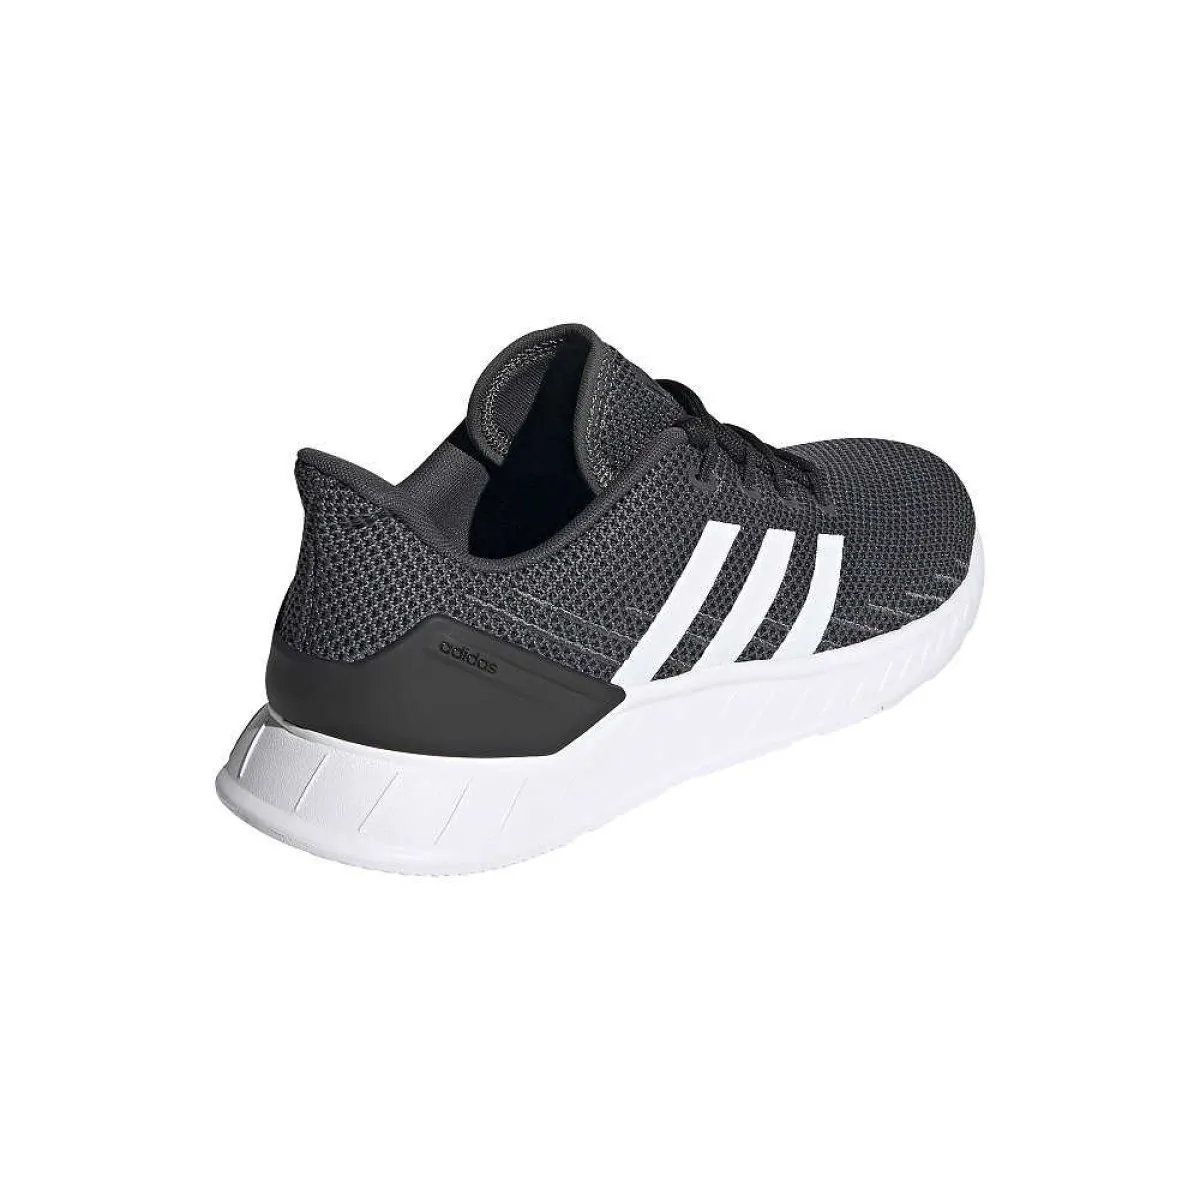 adidas sports shoes Questar Flow black with white stripes